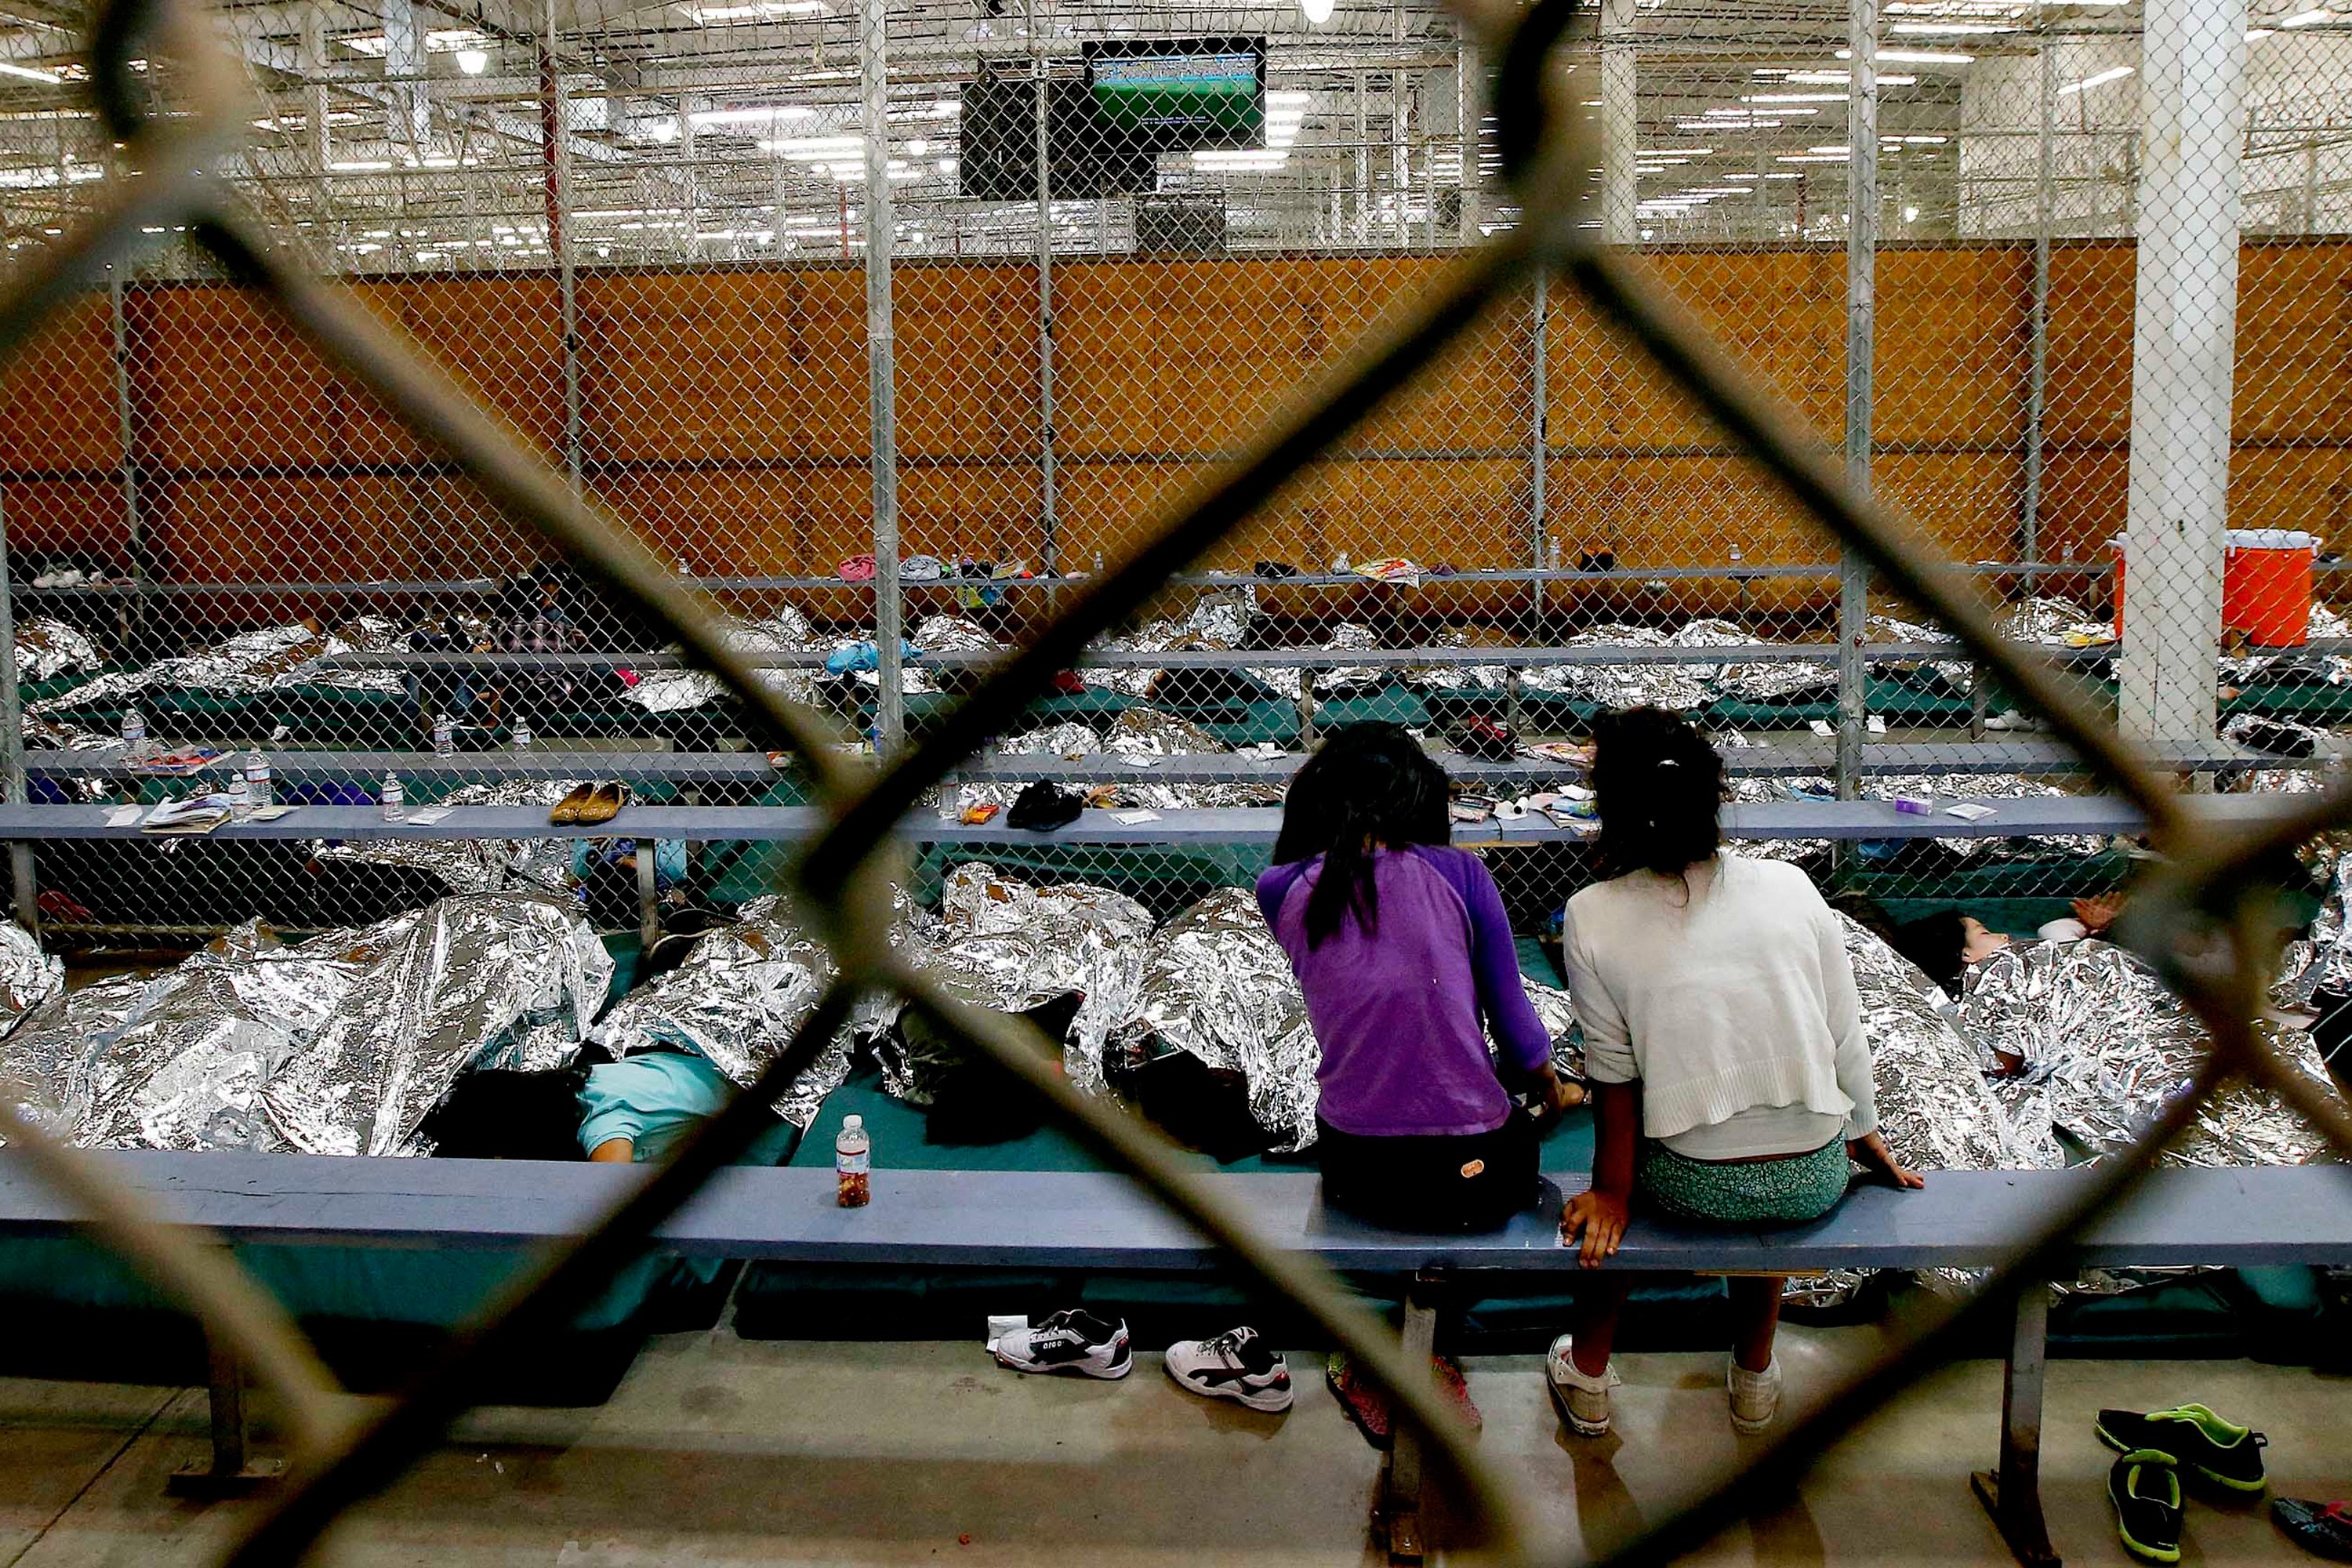 A holding area for mostly Central American immigrant children at the U.S. Customs and Border Protection Placement Center in Nogales, Ariz. July 17, 2014. Ross D. Franklin | AP